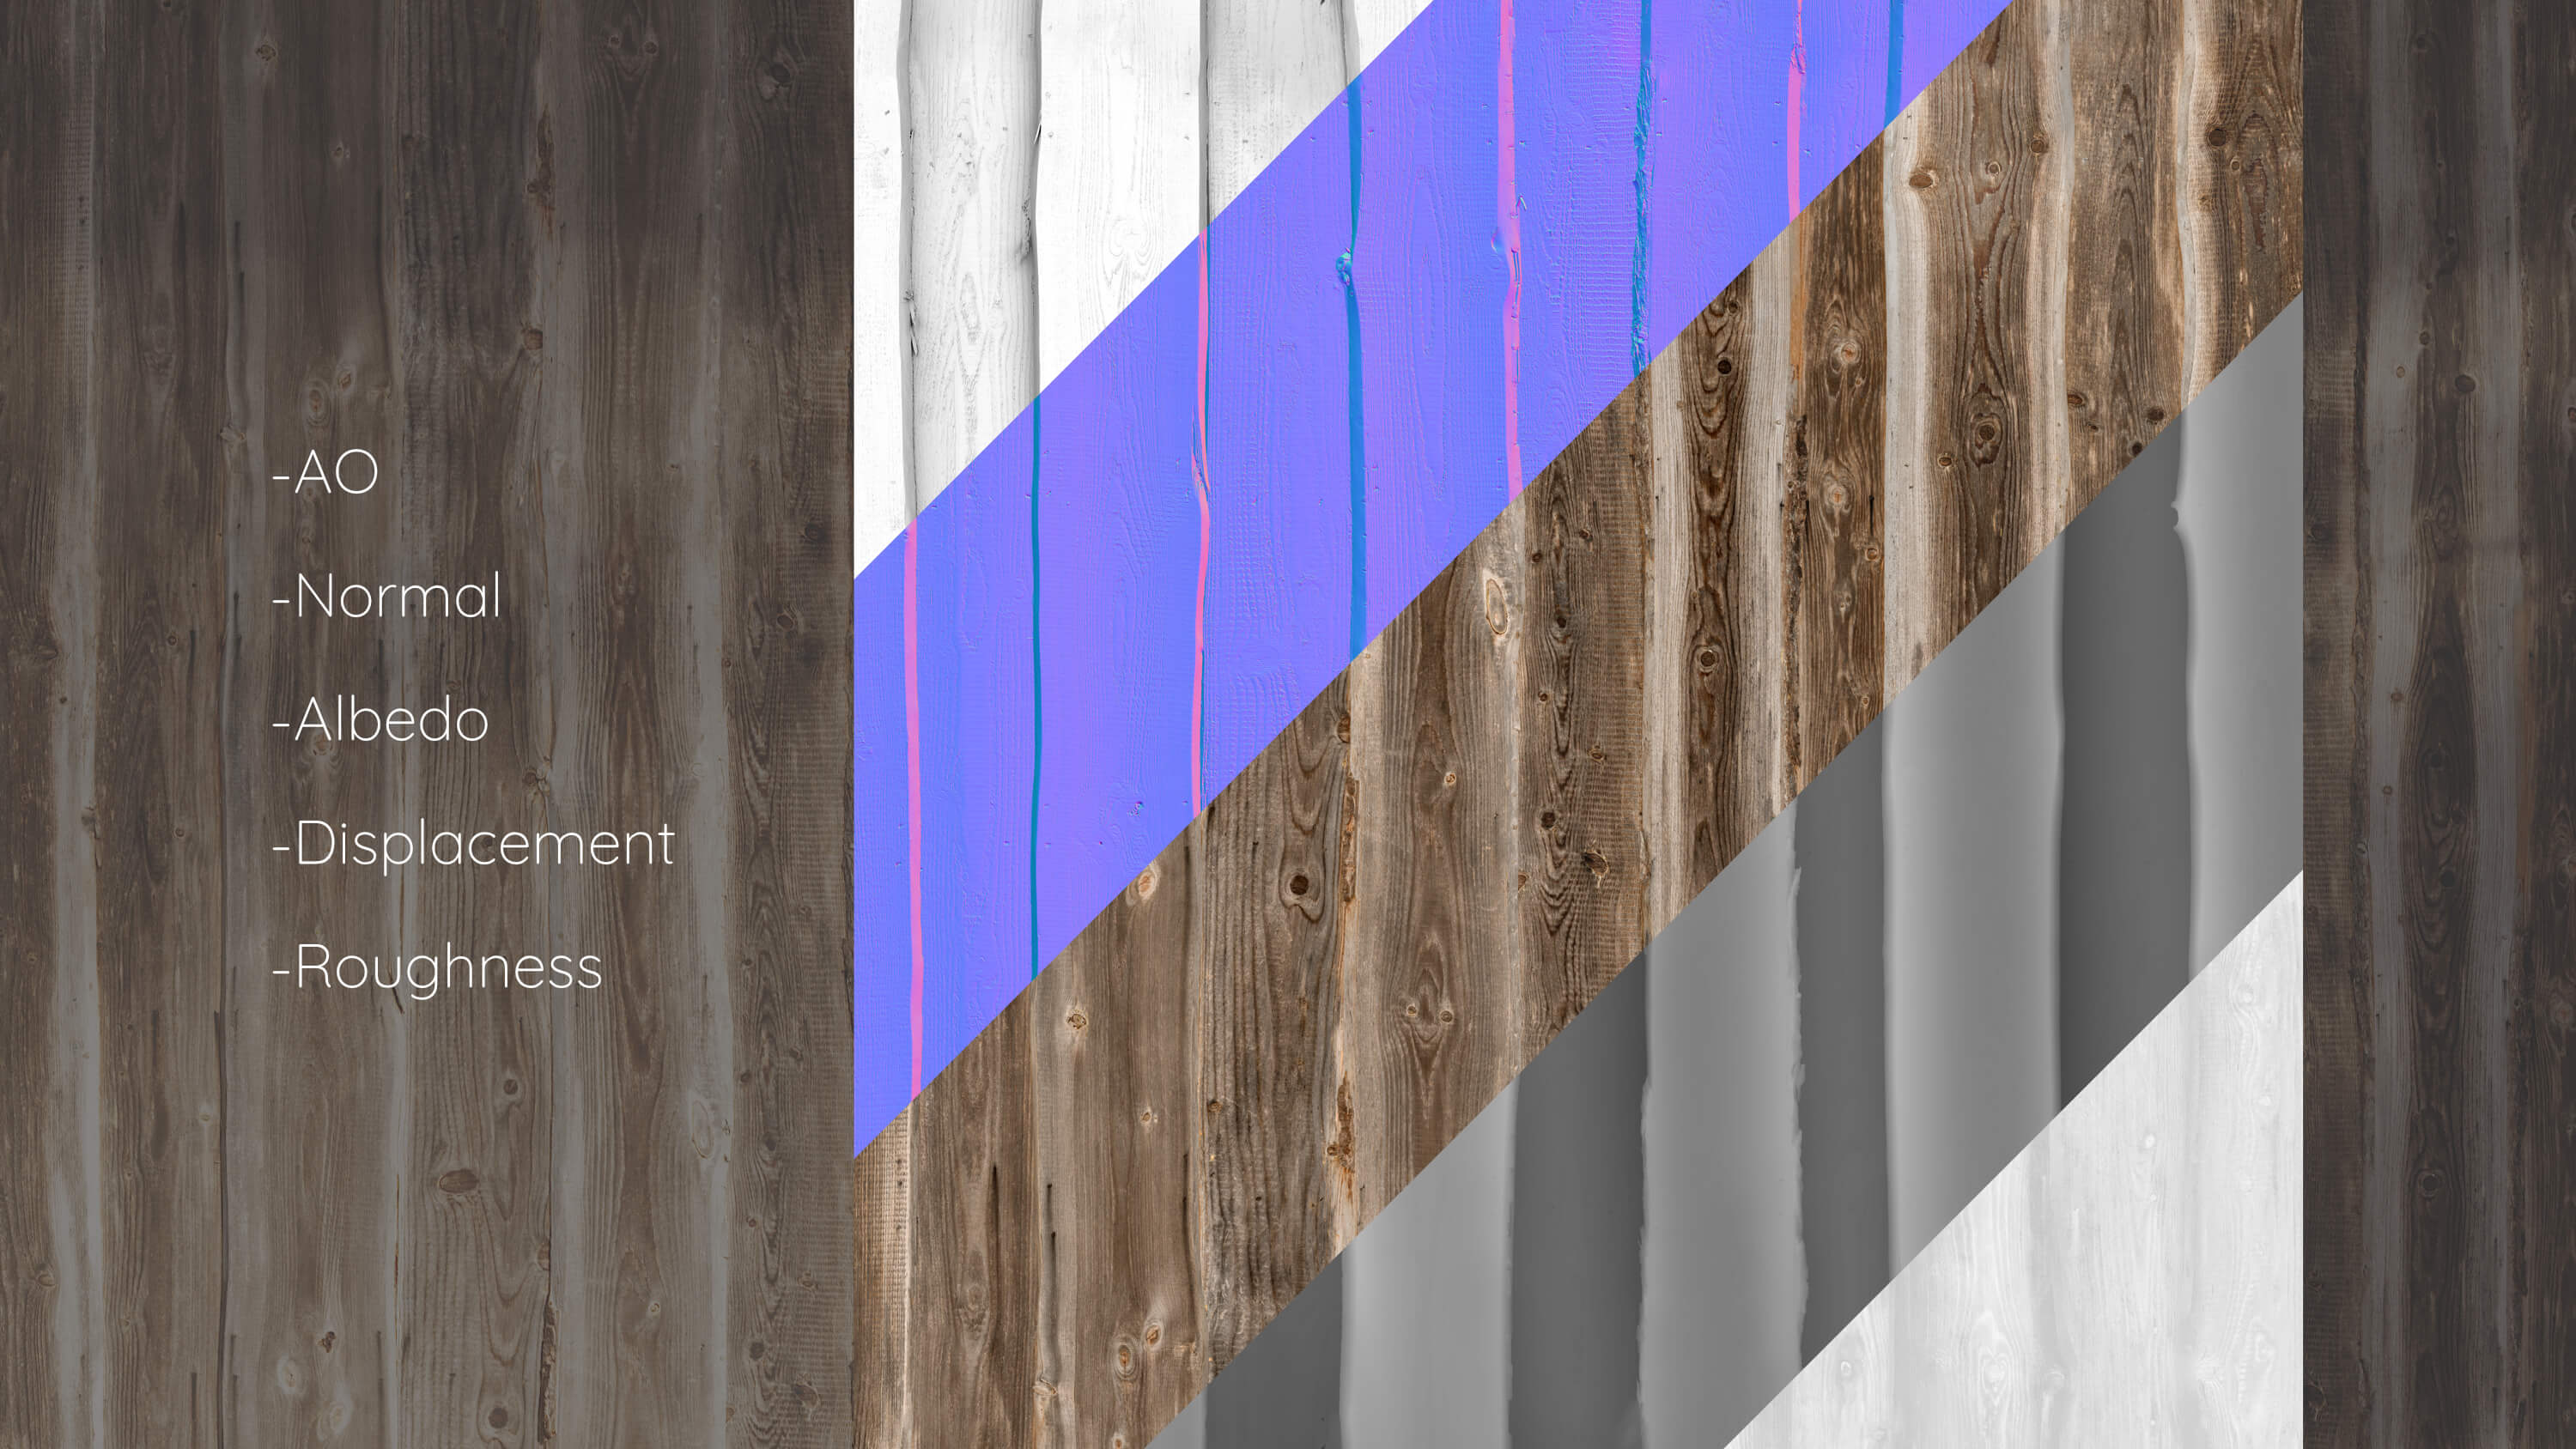 3D scanned seamless wooden planks texture